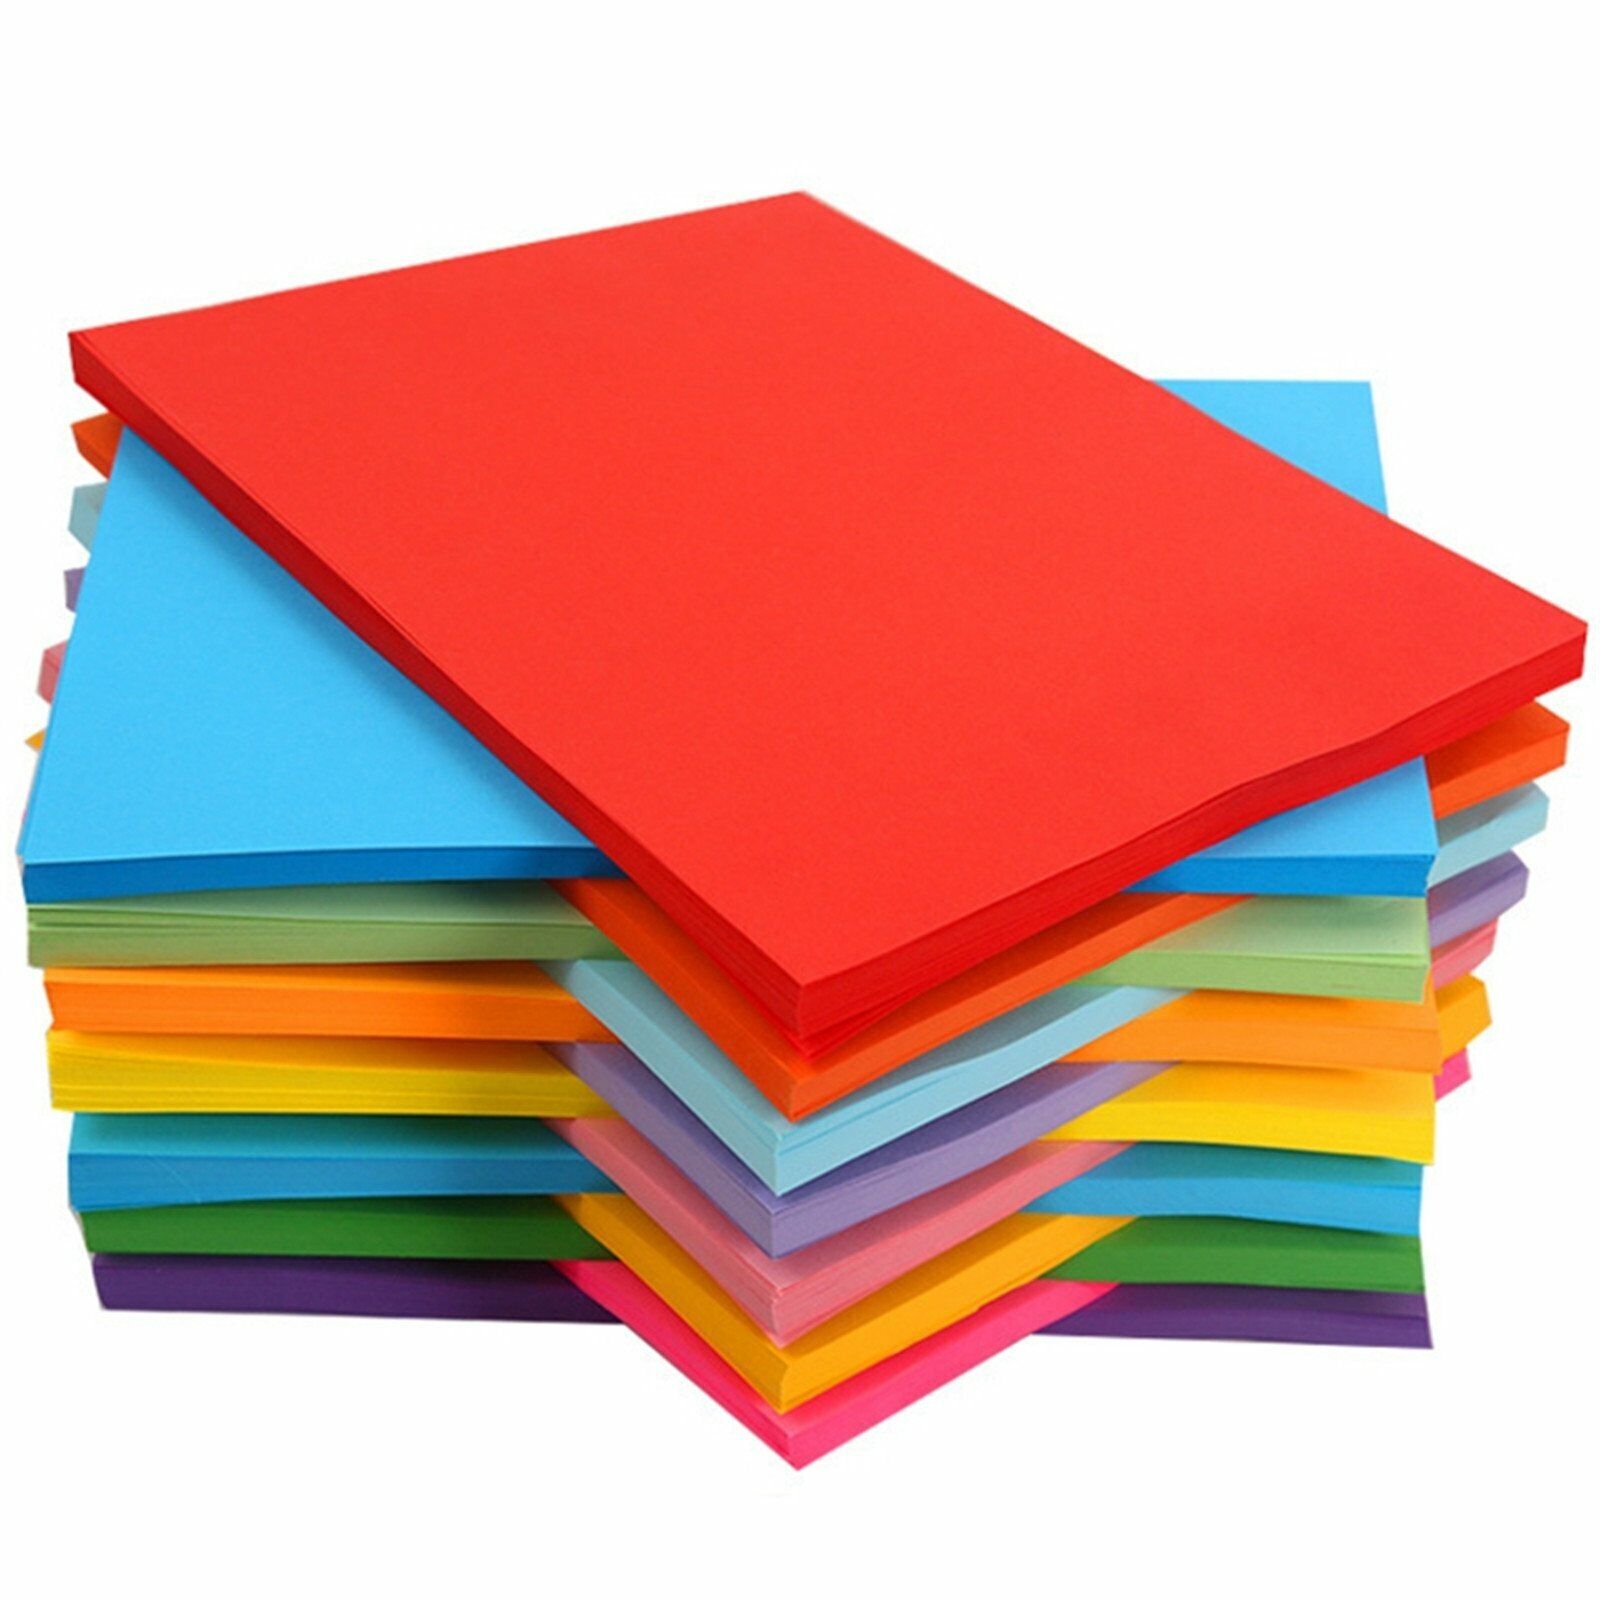 50 Sheets 70gsm A4 Coloured Card Paper DIY Craft Paper Making Cardstock Premium